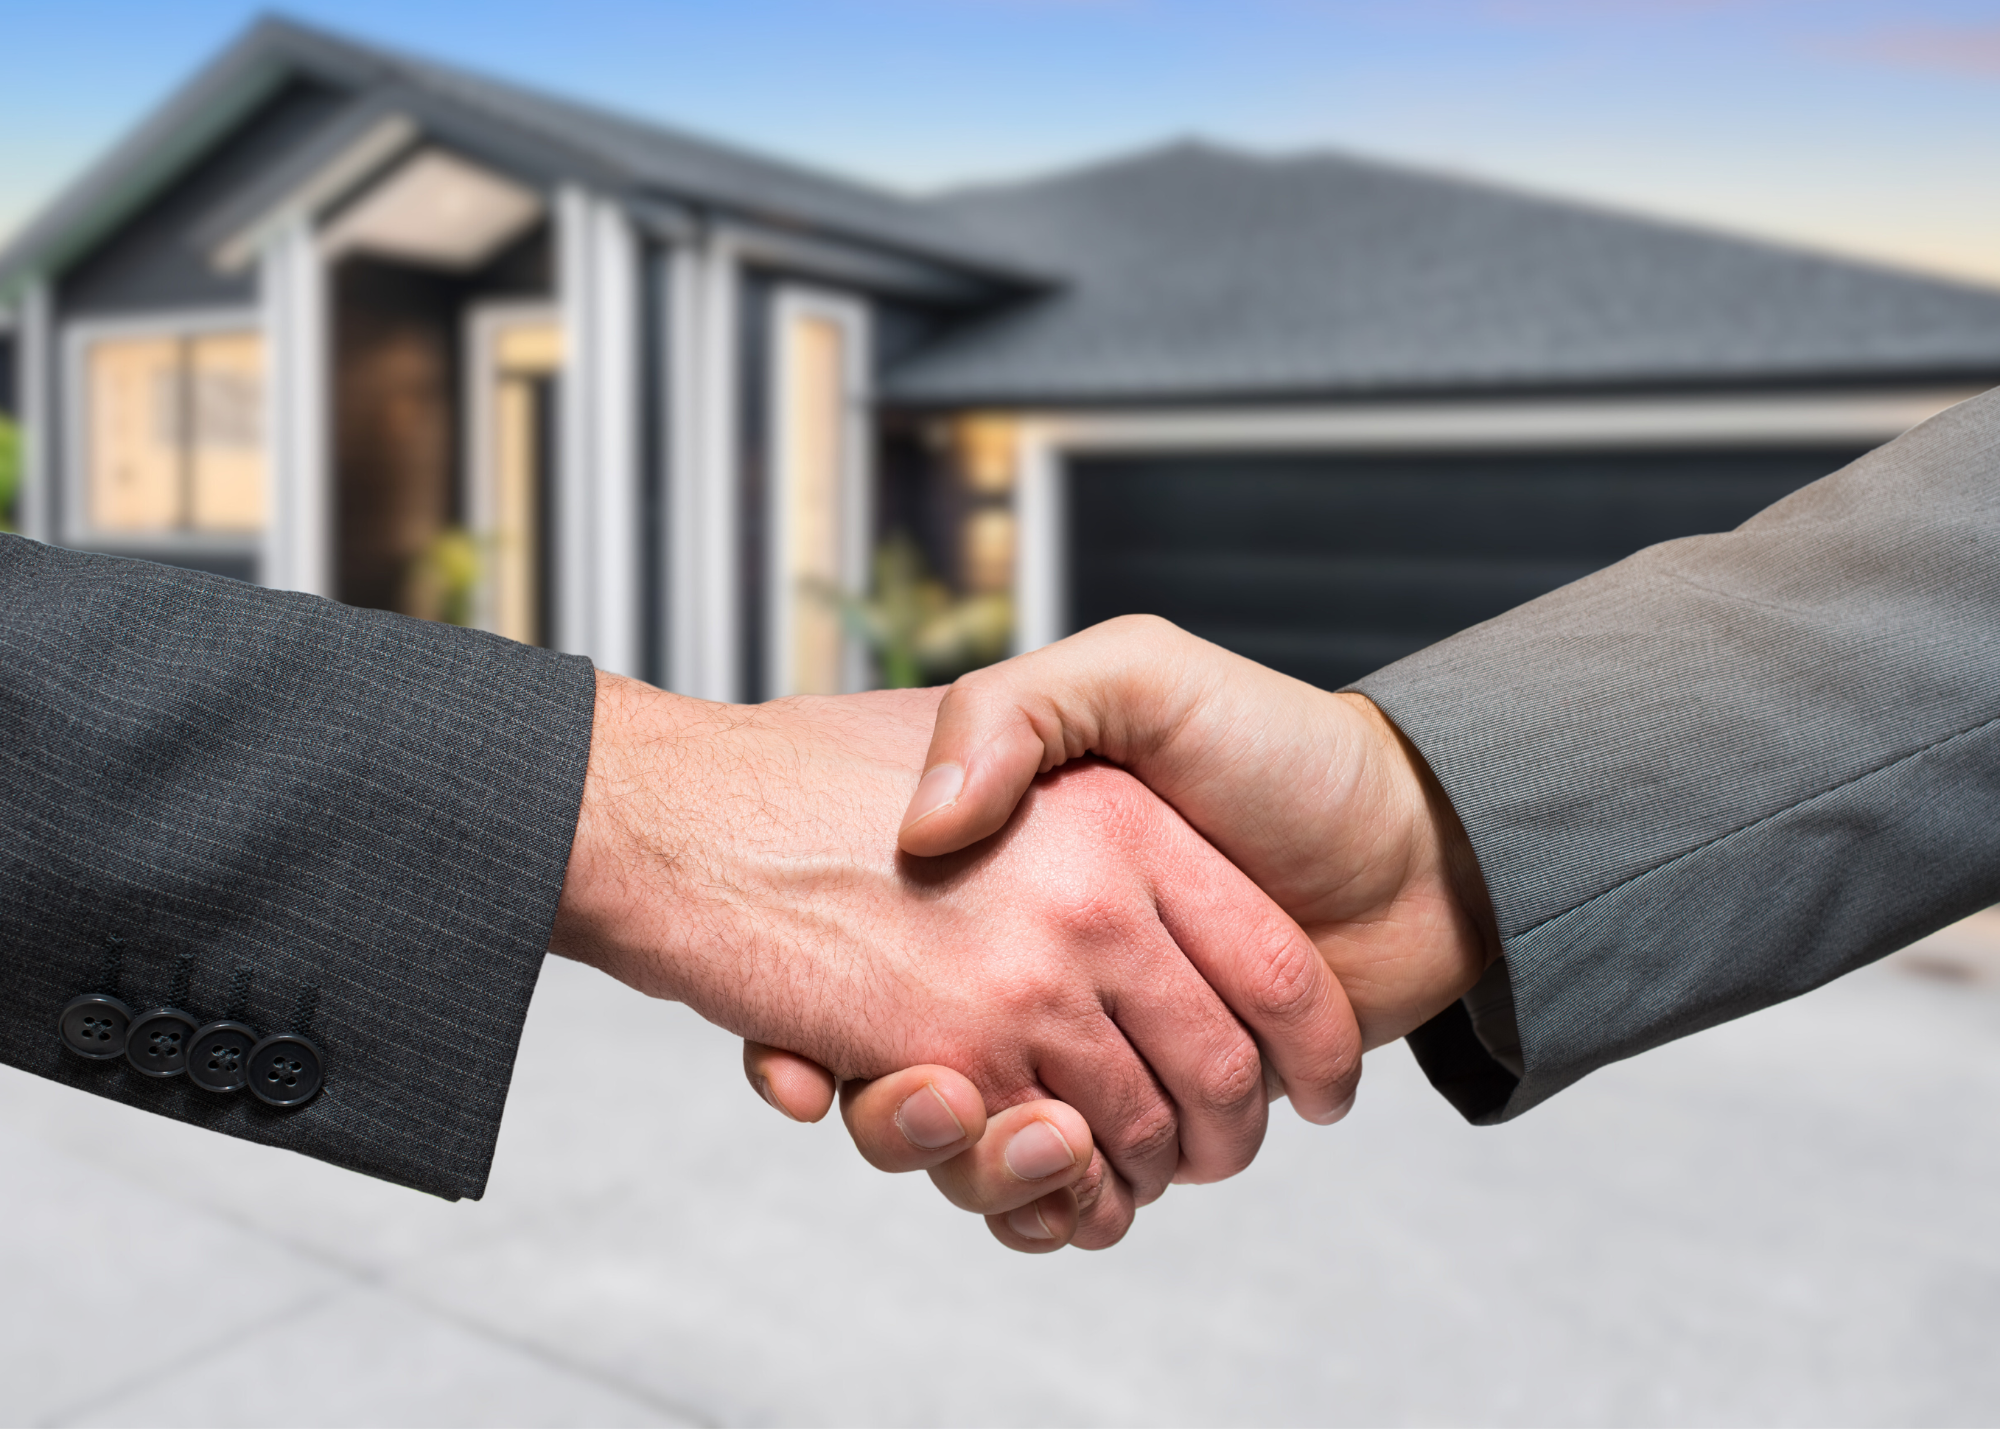 The Art of Negotiating in Real Estate